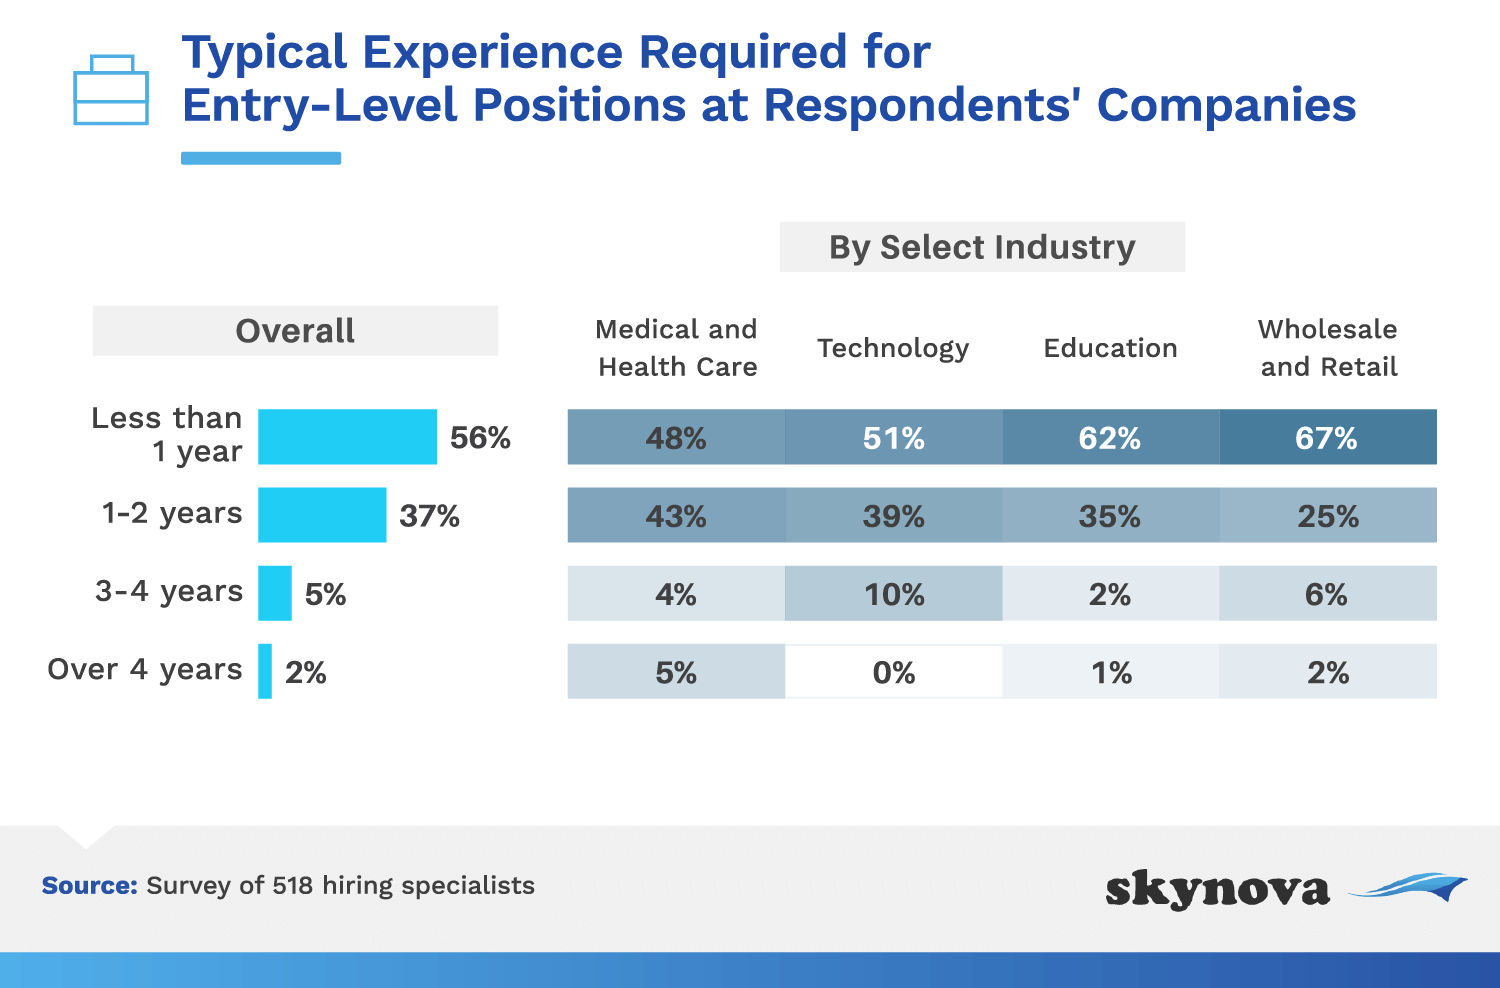 Typical experience required for entry-level positions, according to hiring specialists